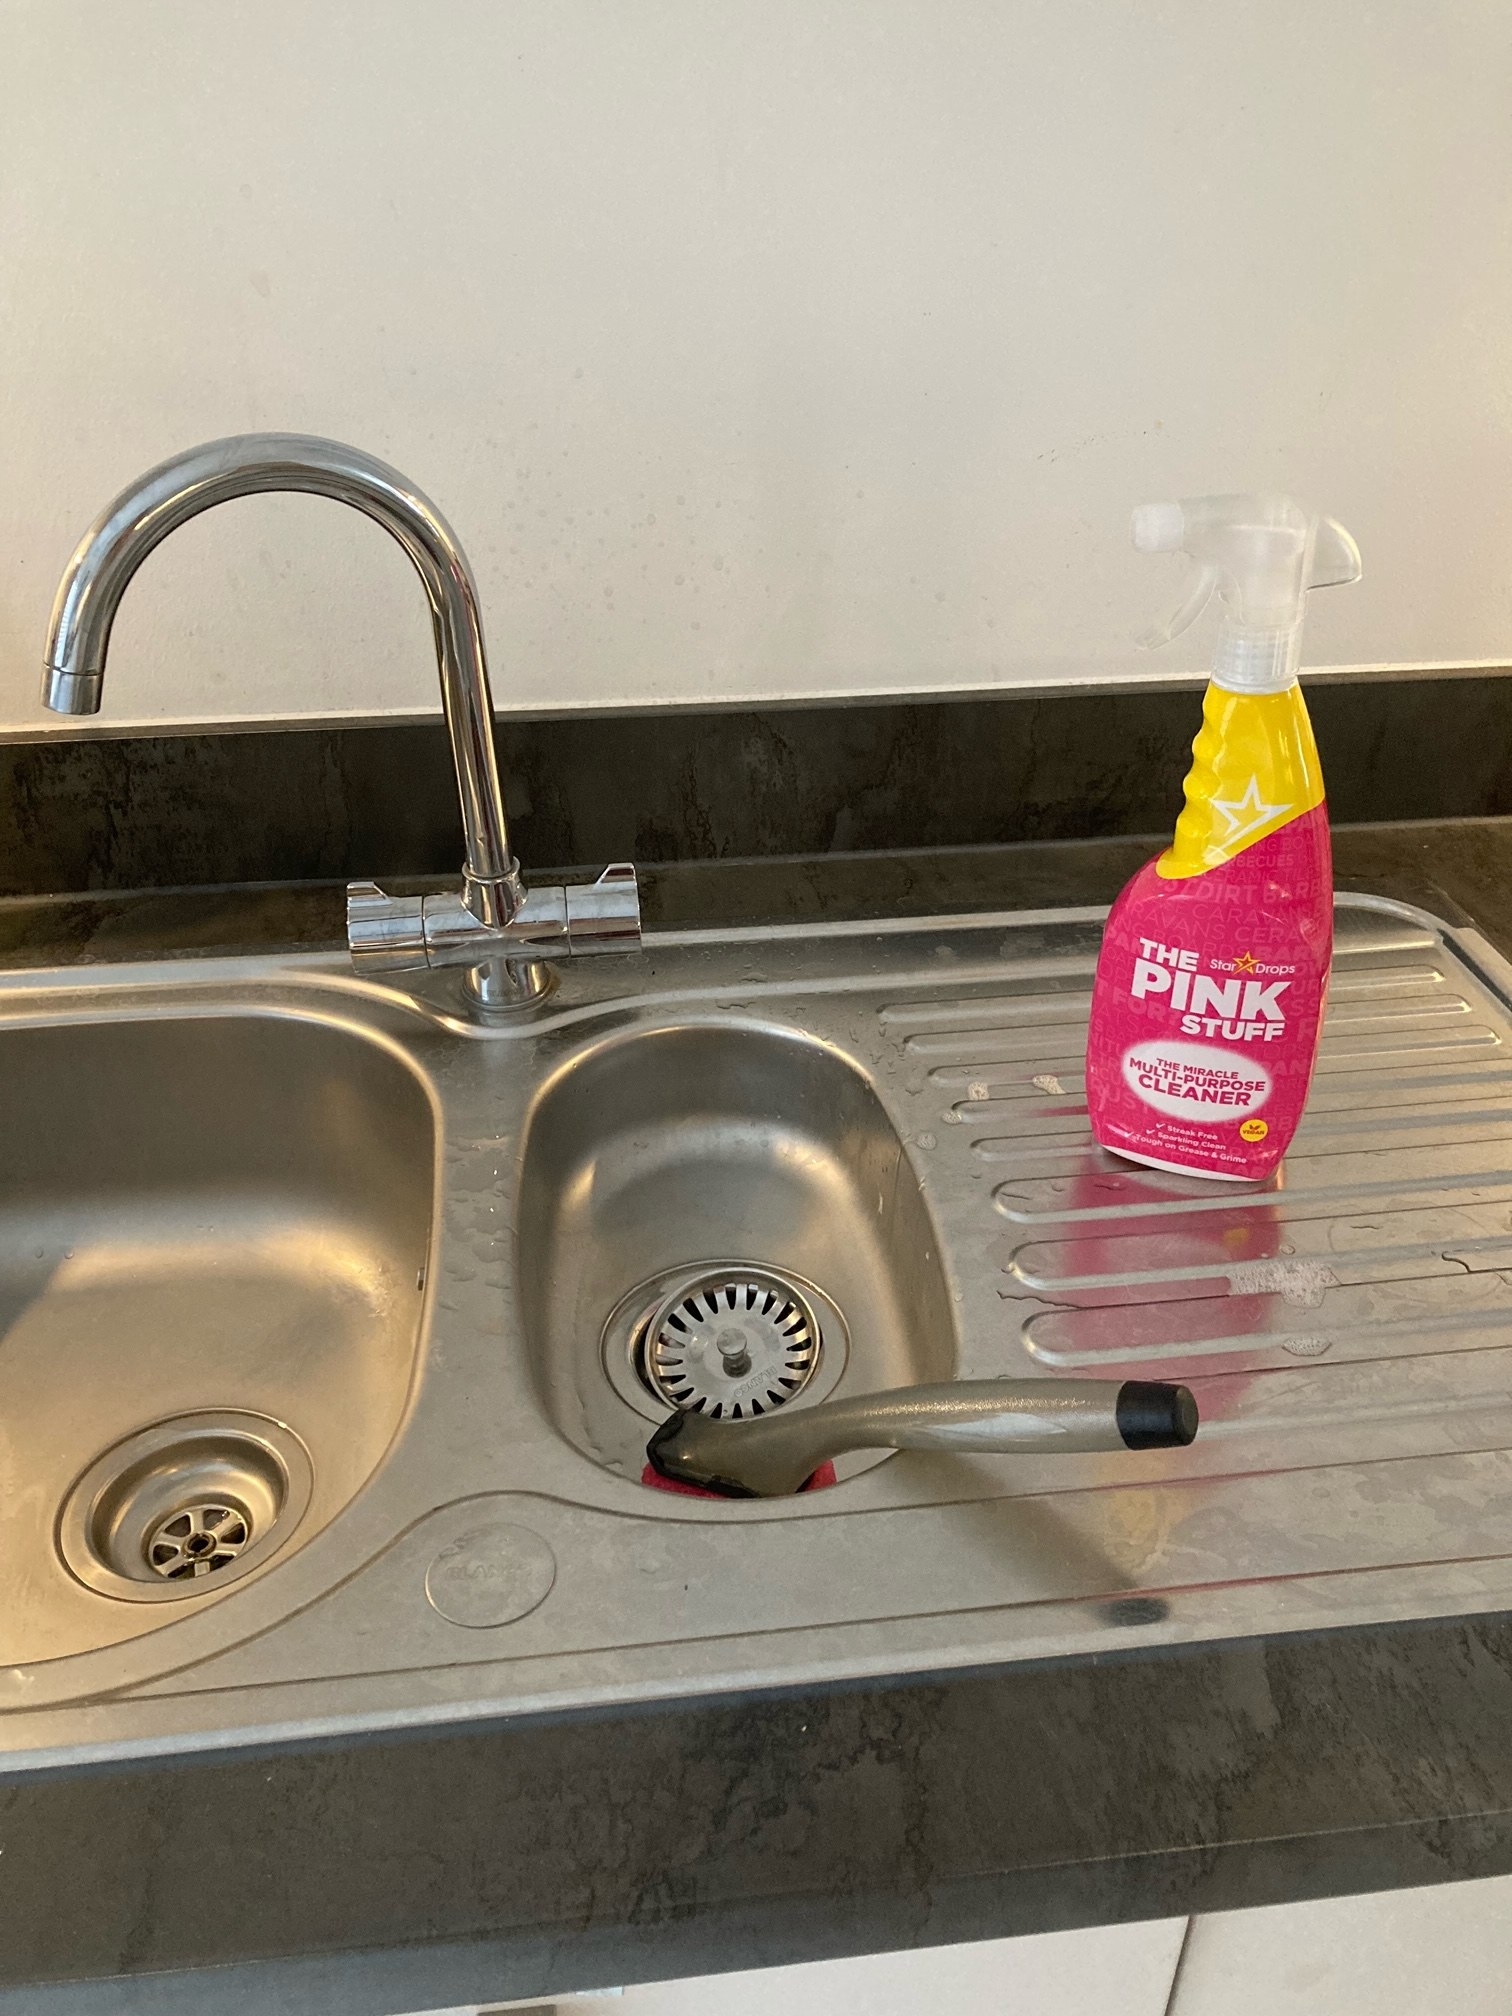 The Pink Stuff Review – TikTok Says You Need This Amazing Cleaner Now